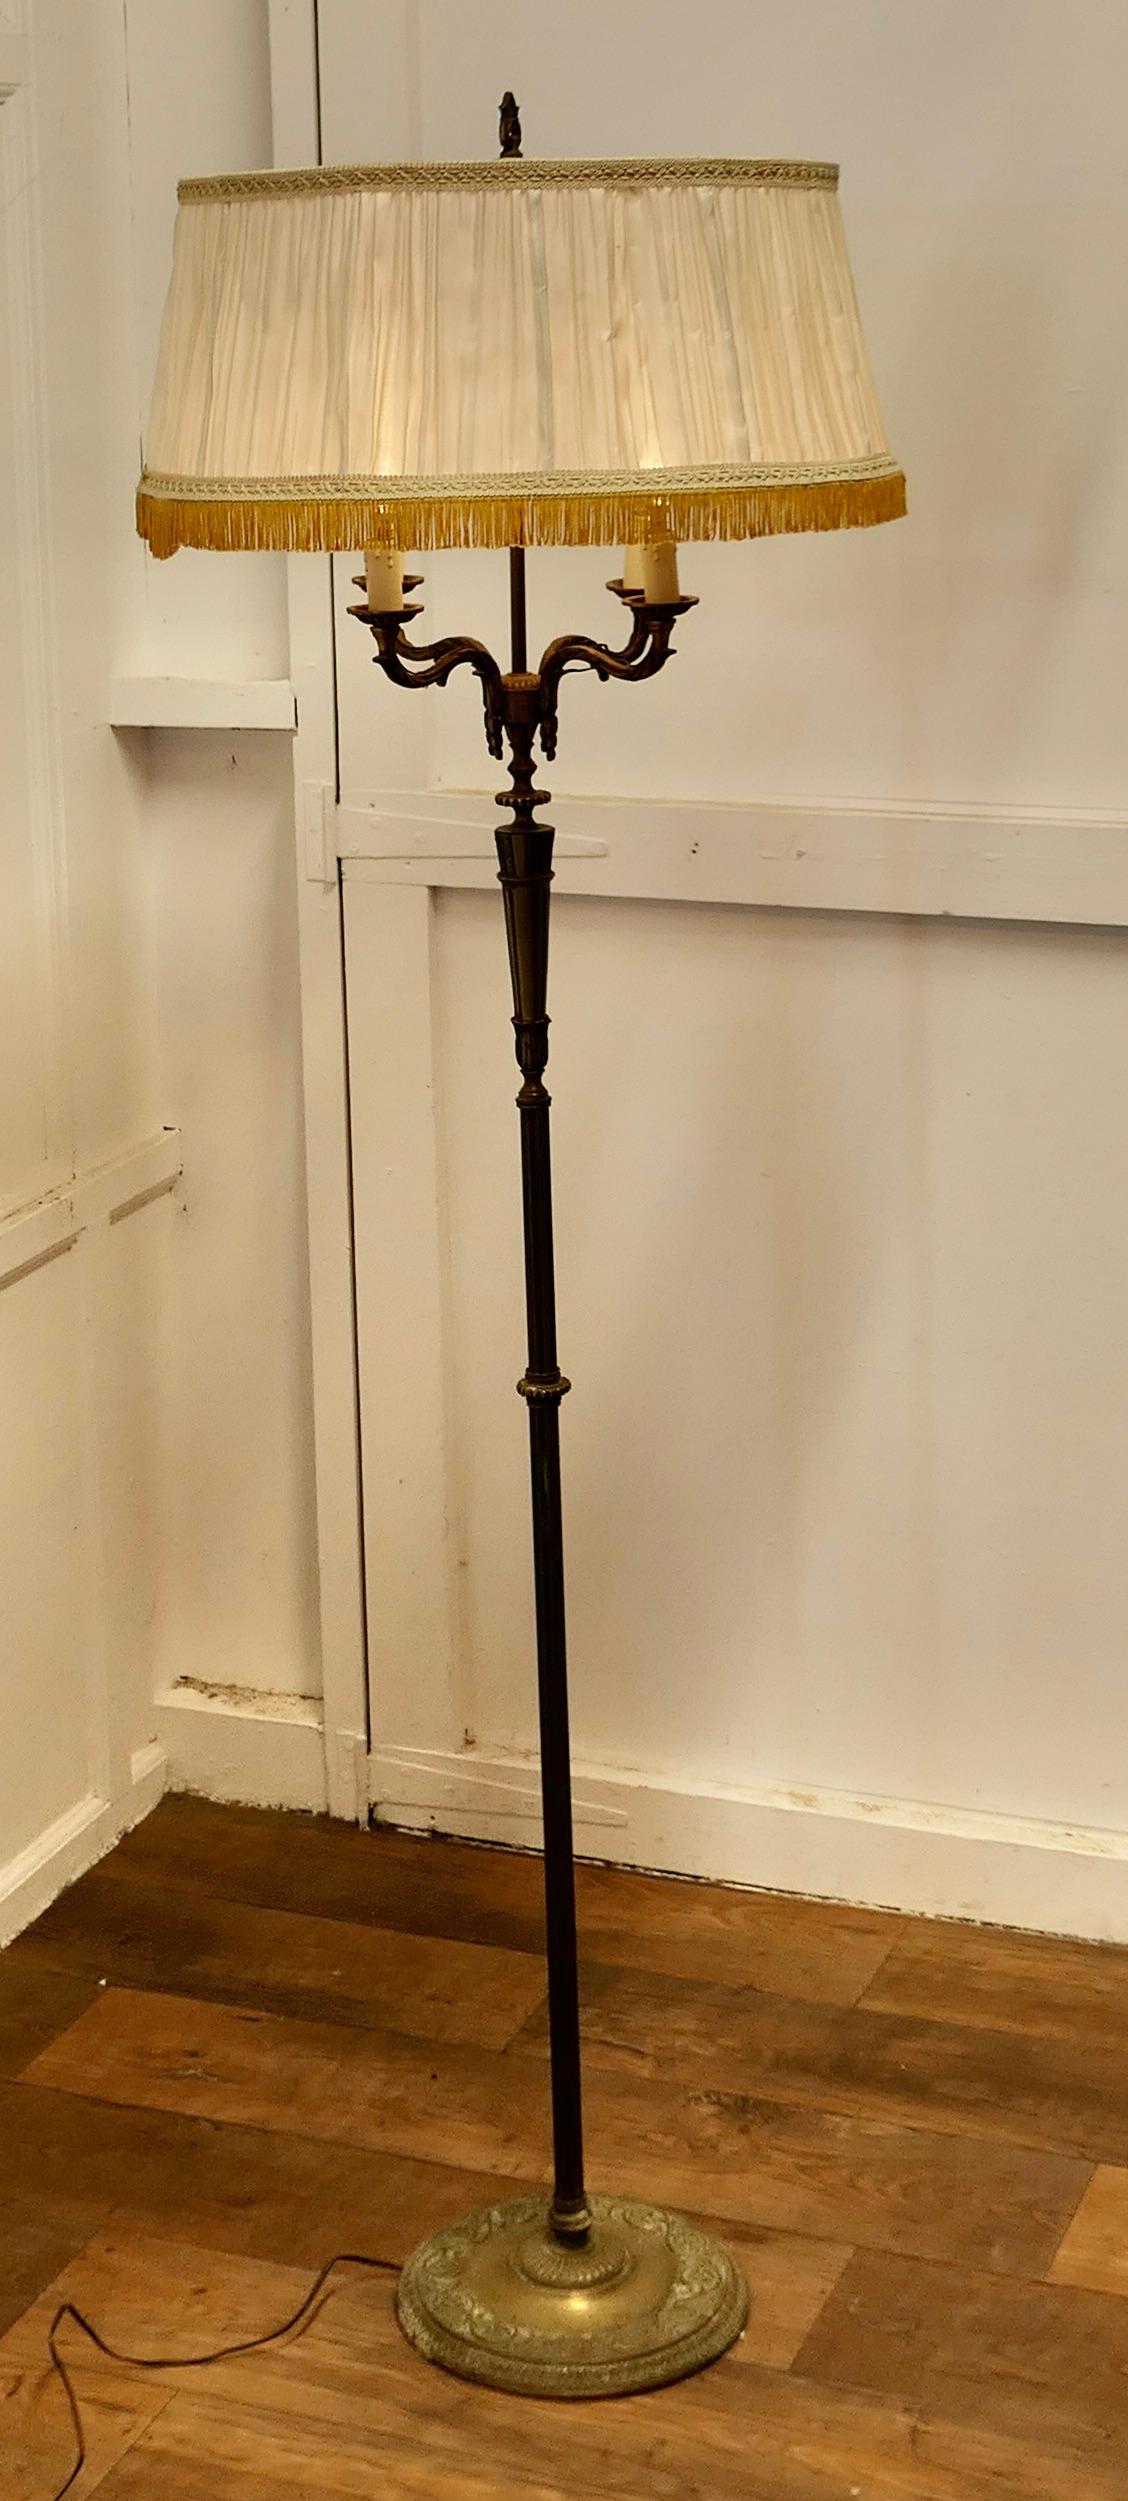 Rococo Gilt Brass Candelabra 4 Branch Floor Lamp, Standard Lamp  This is an elab In Good Condition For Sale In Chillerton, Isle of Wight